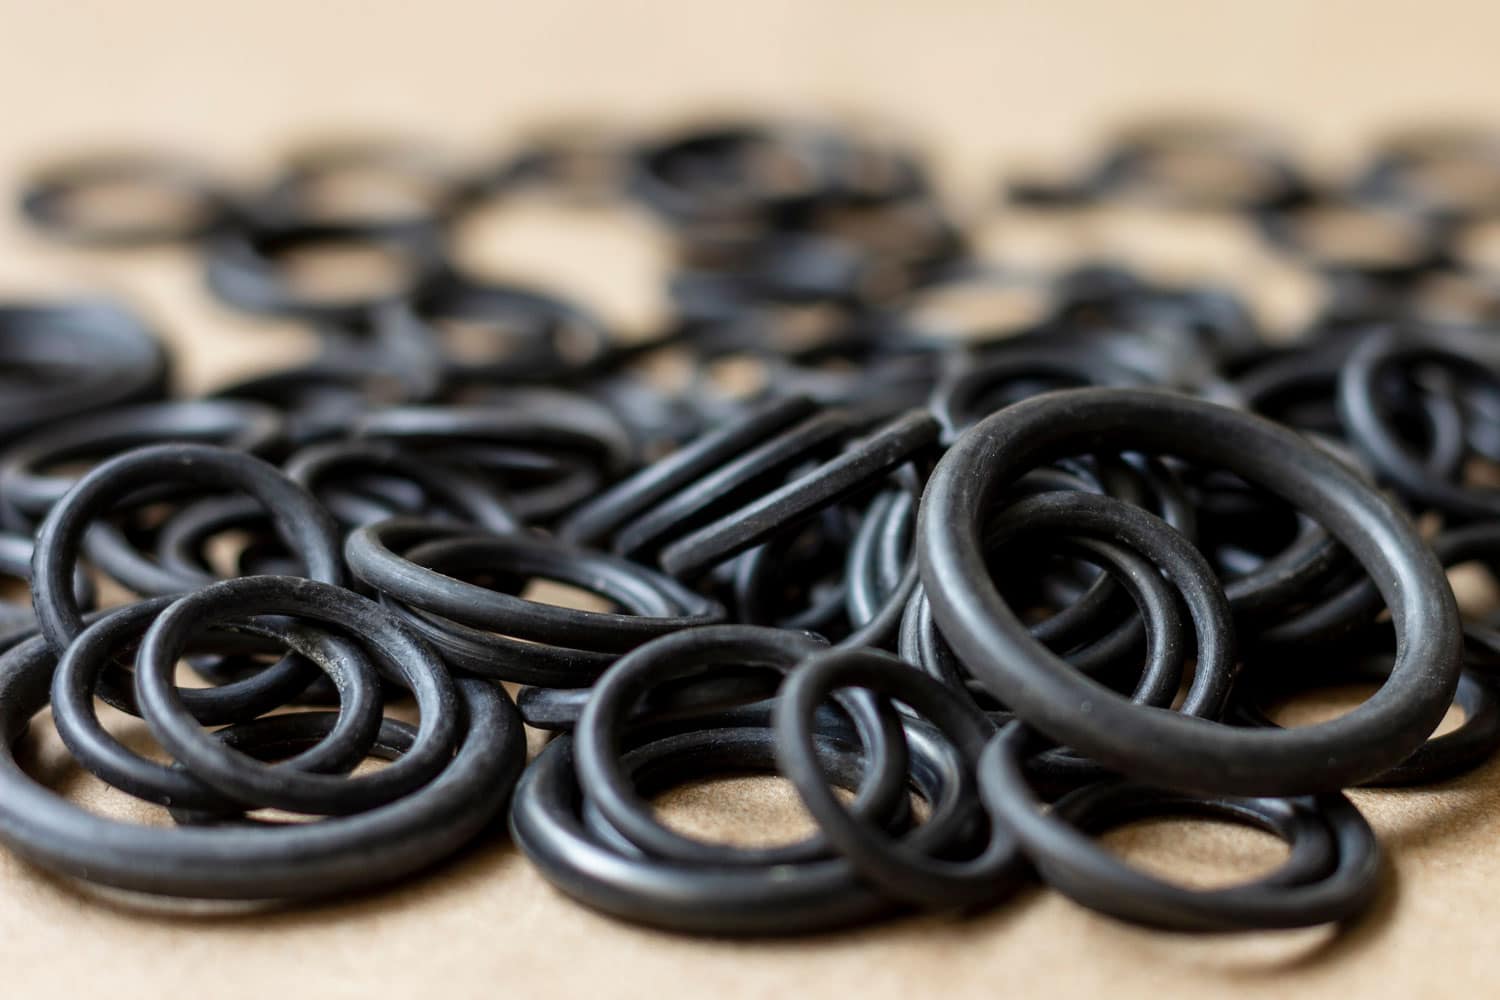 Rubber sealing o-rings for sealing various parts of technology, machinery and mechanisms. 